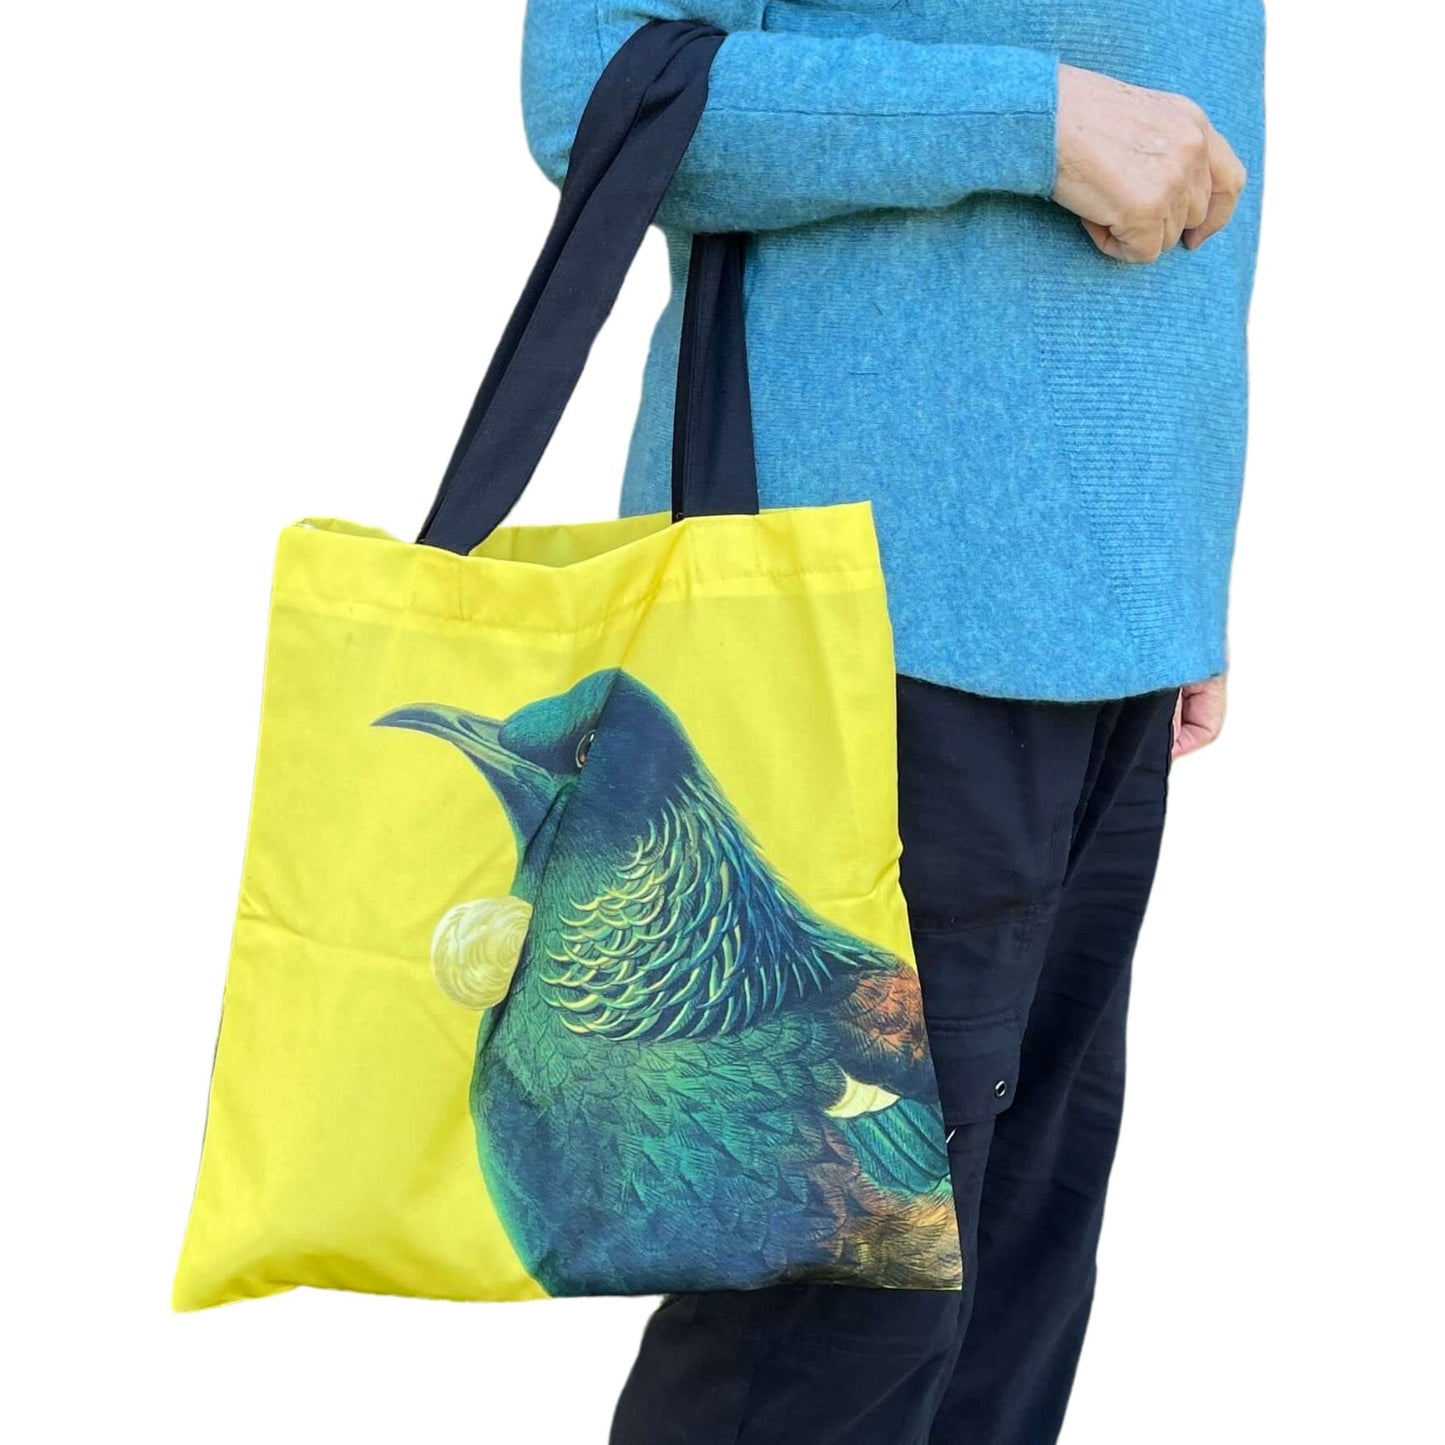 Woman with a tote bag over her arm. The bright yellow tote features a Tui bird.